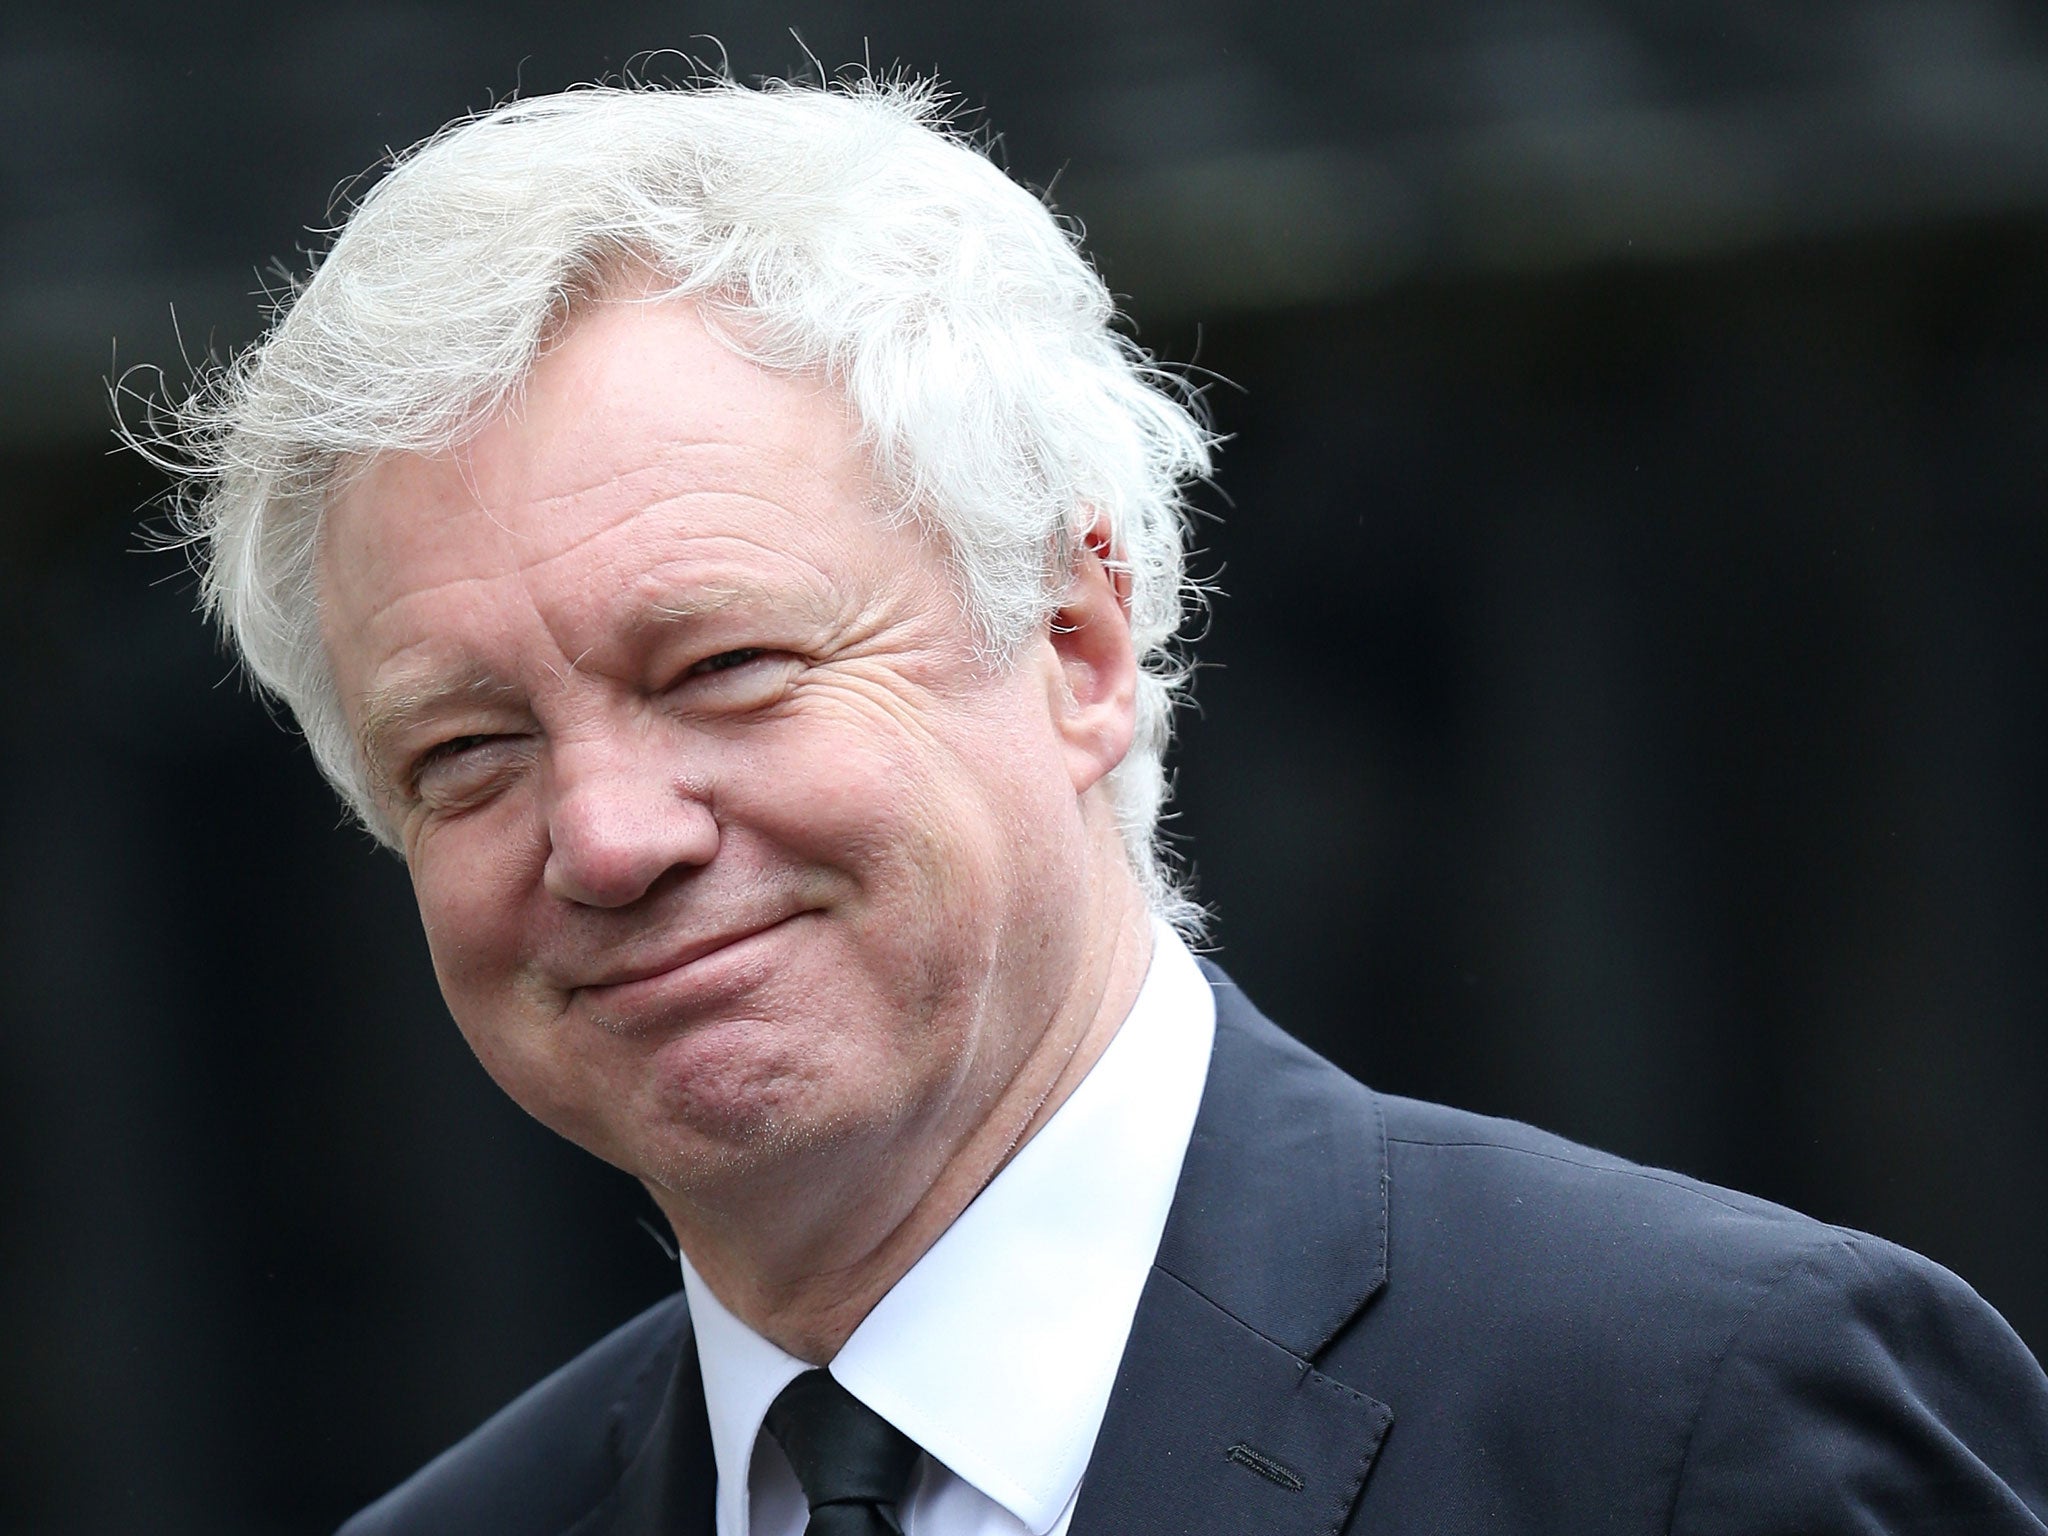 David Davis, the Brexit Secretary, is opposed to free movement of people – but the evidence shows it's good for all of us